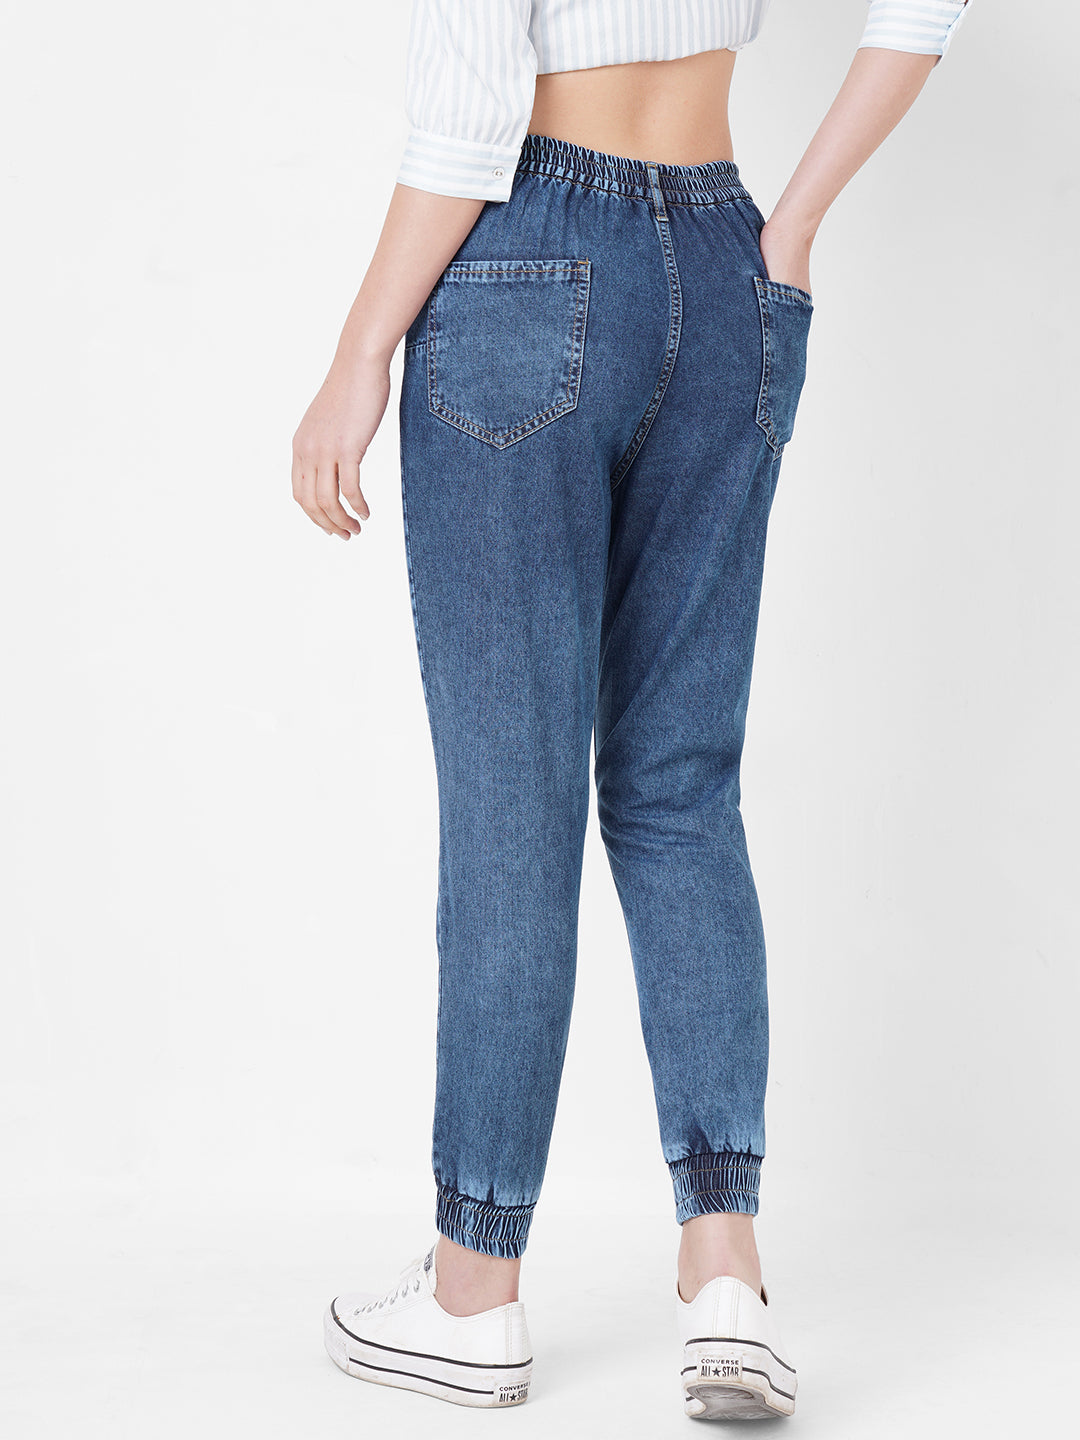 LegEase High Waisted Denim Joggers Redefine Comfort With